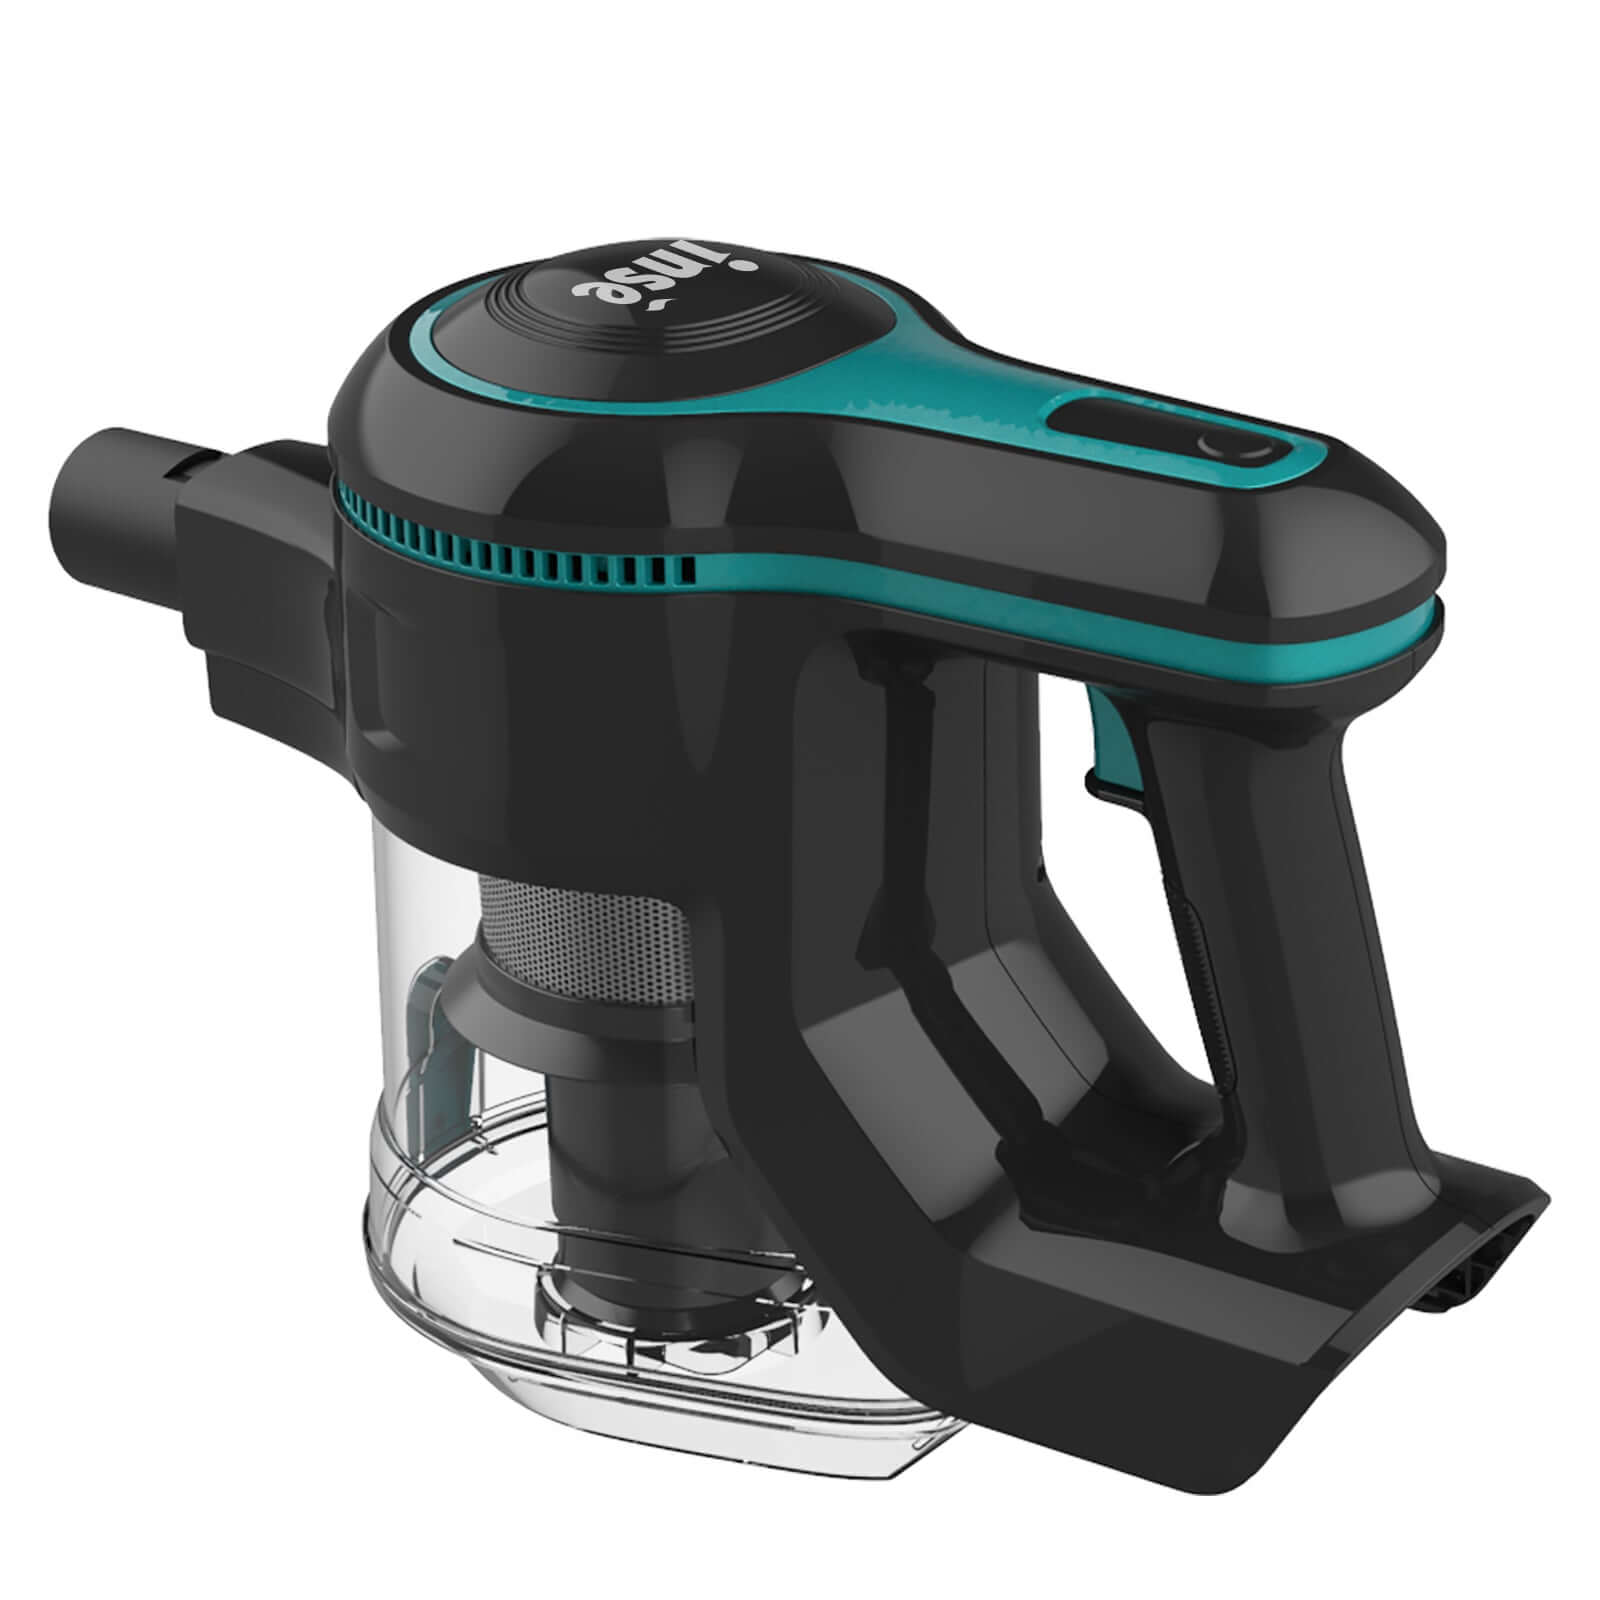 INSE Vacuum Motor with Dust Box Green for Cordless Vacuum S600 (inselife.com)